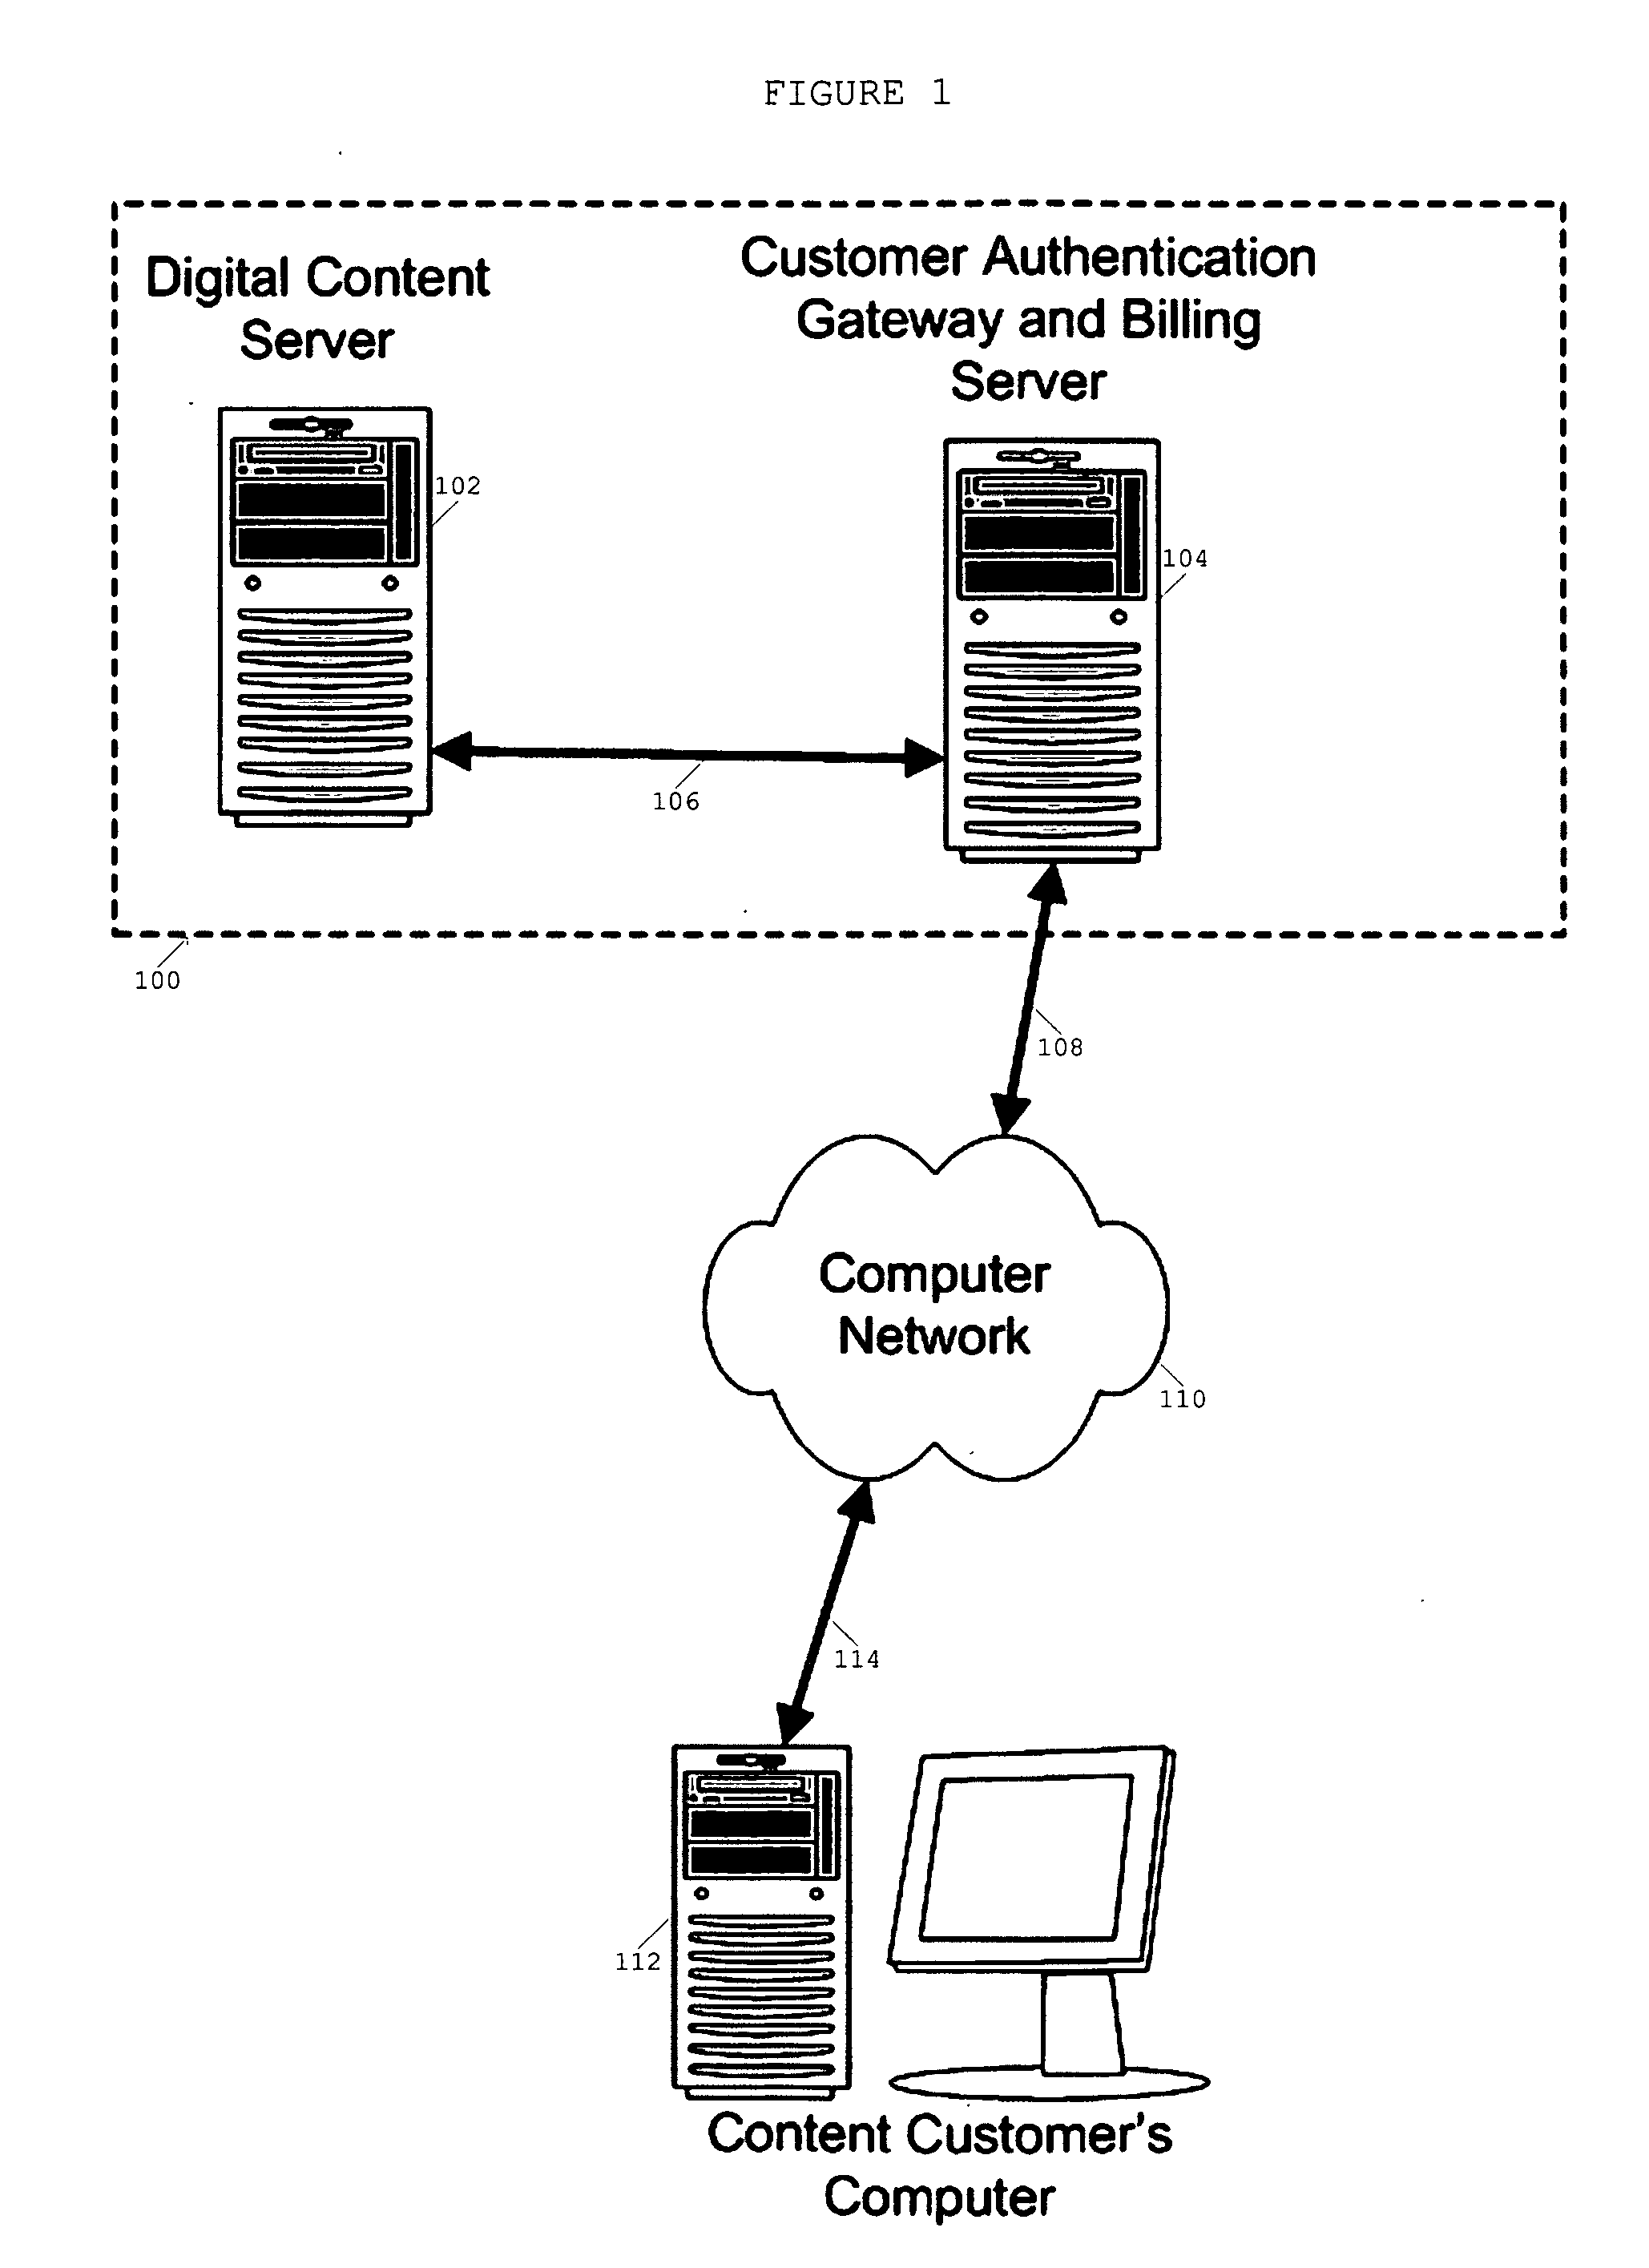 Method and apparatus for the rental or sale, and secure distribution of digital content